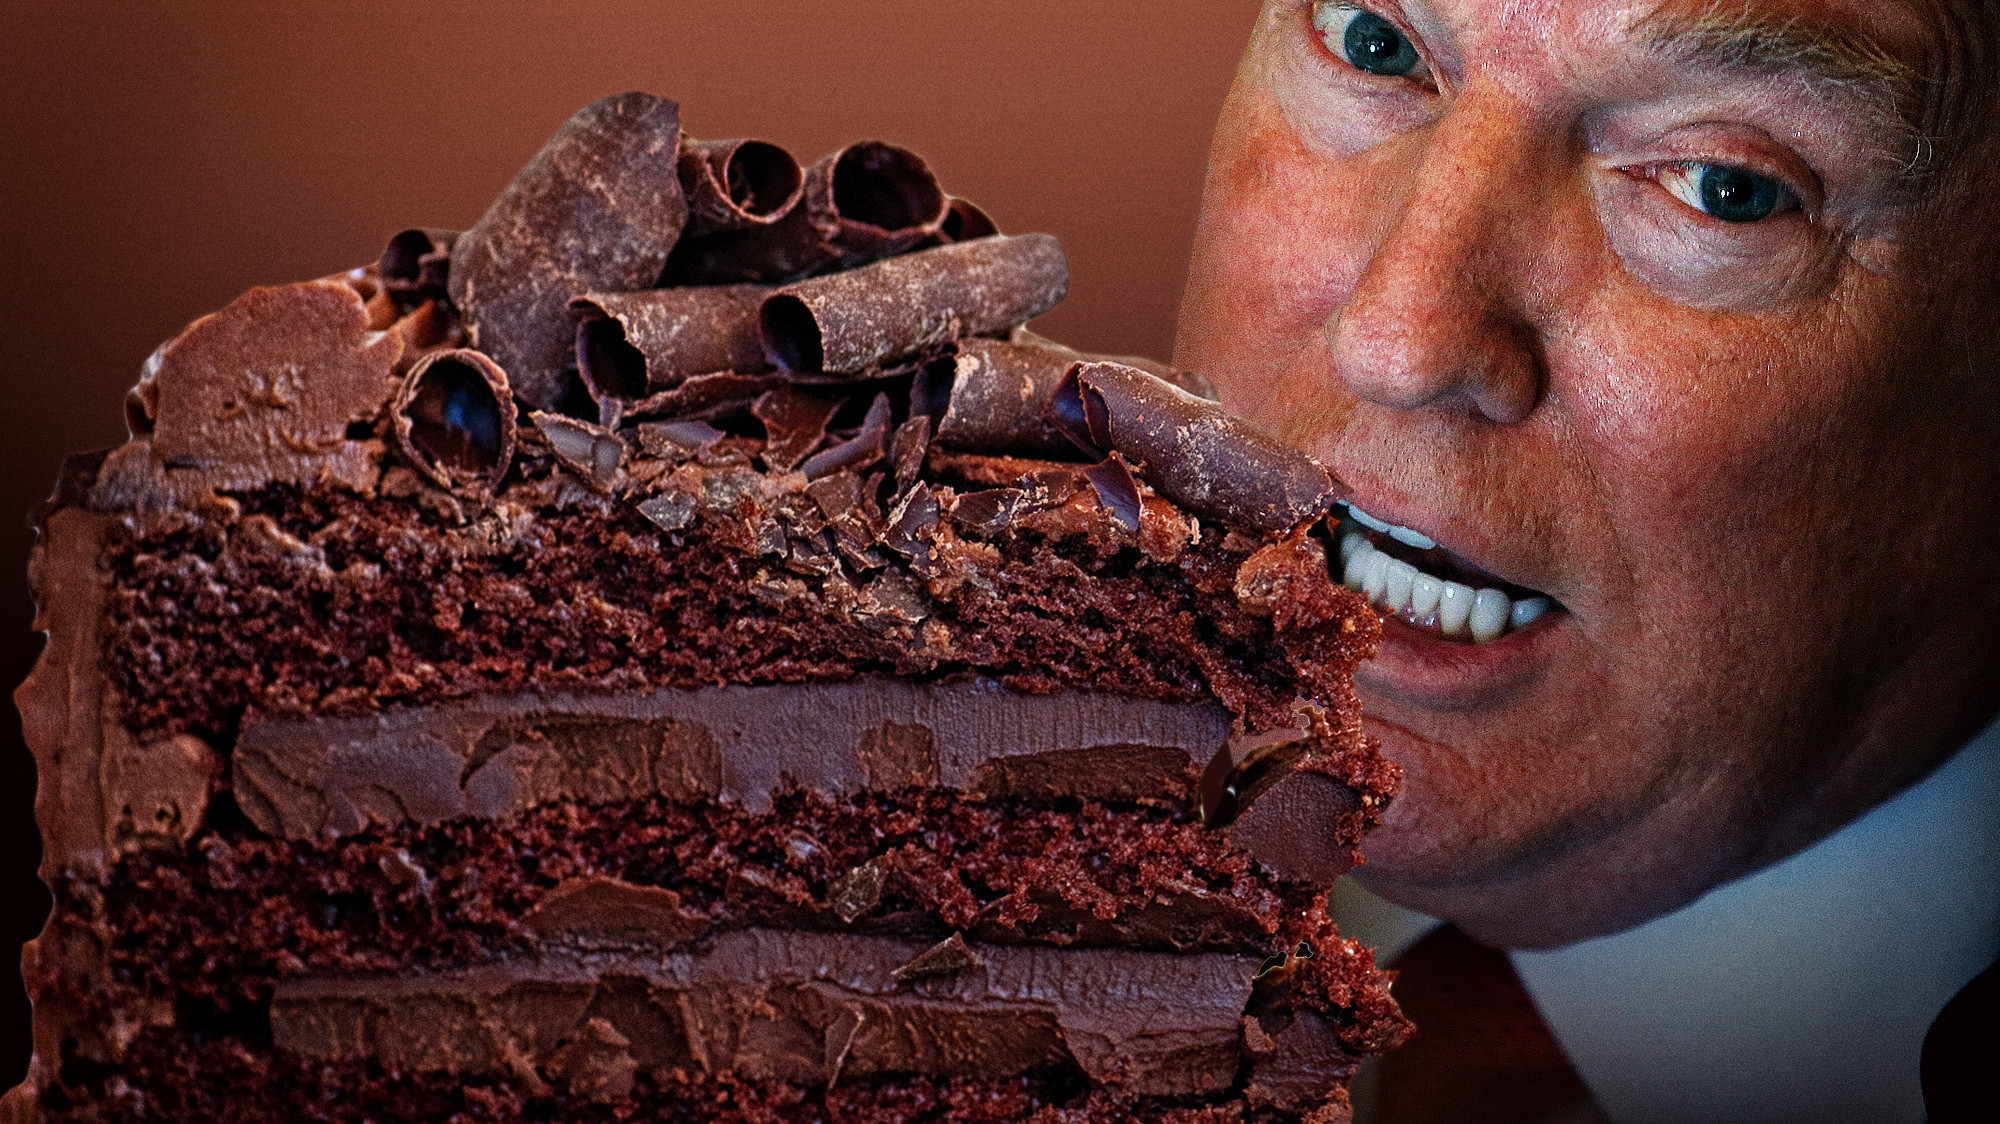 Donald Trump Chocolate Cake
 Trump Brags About Eating the "Most Beautiful" Chocolate